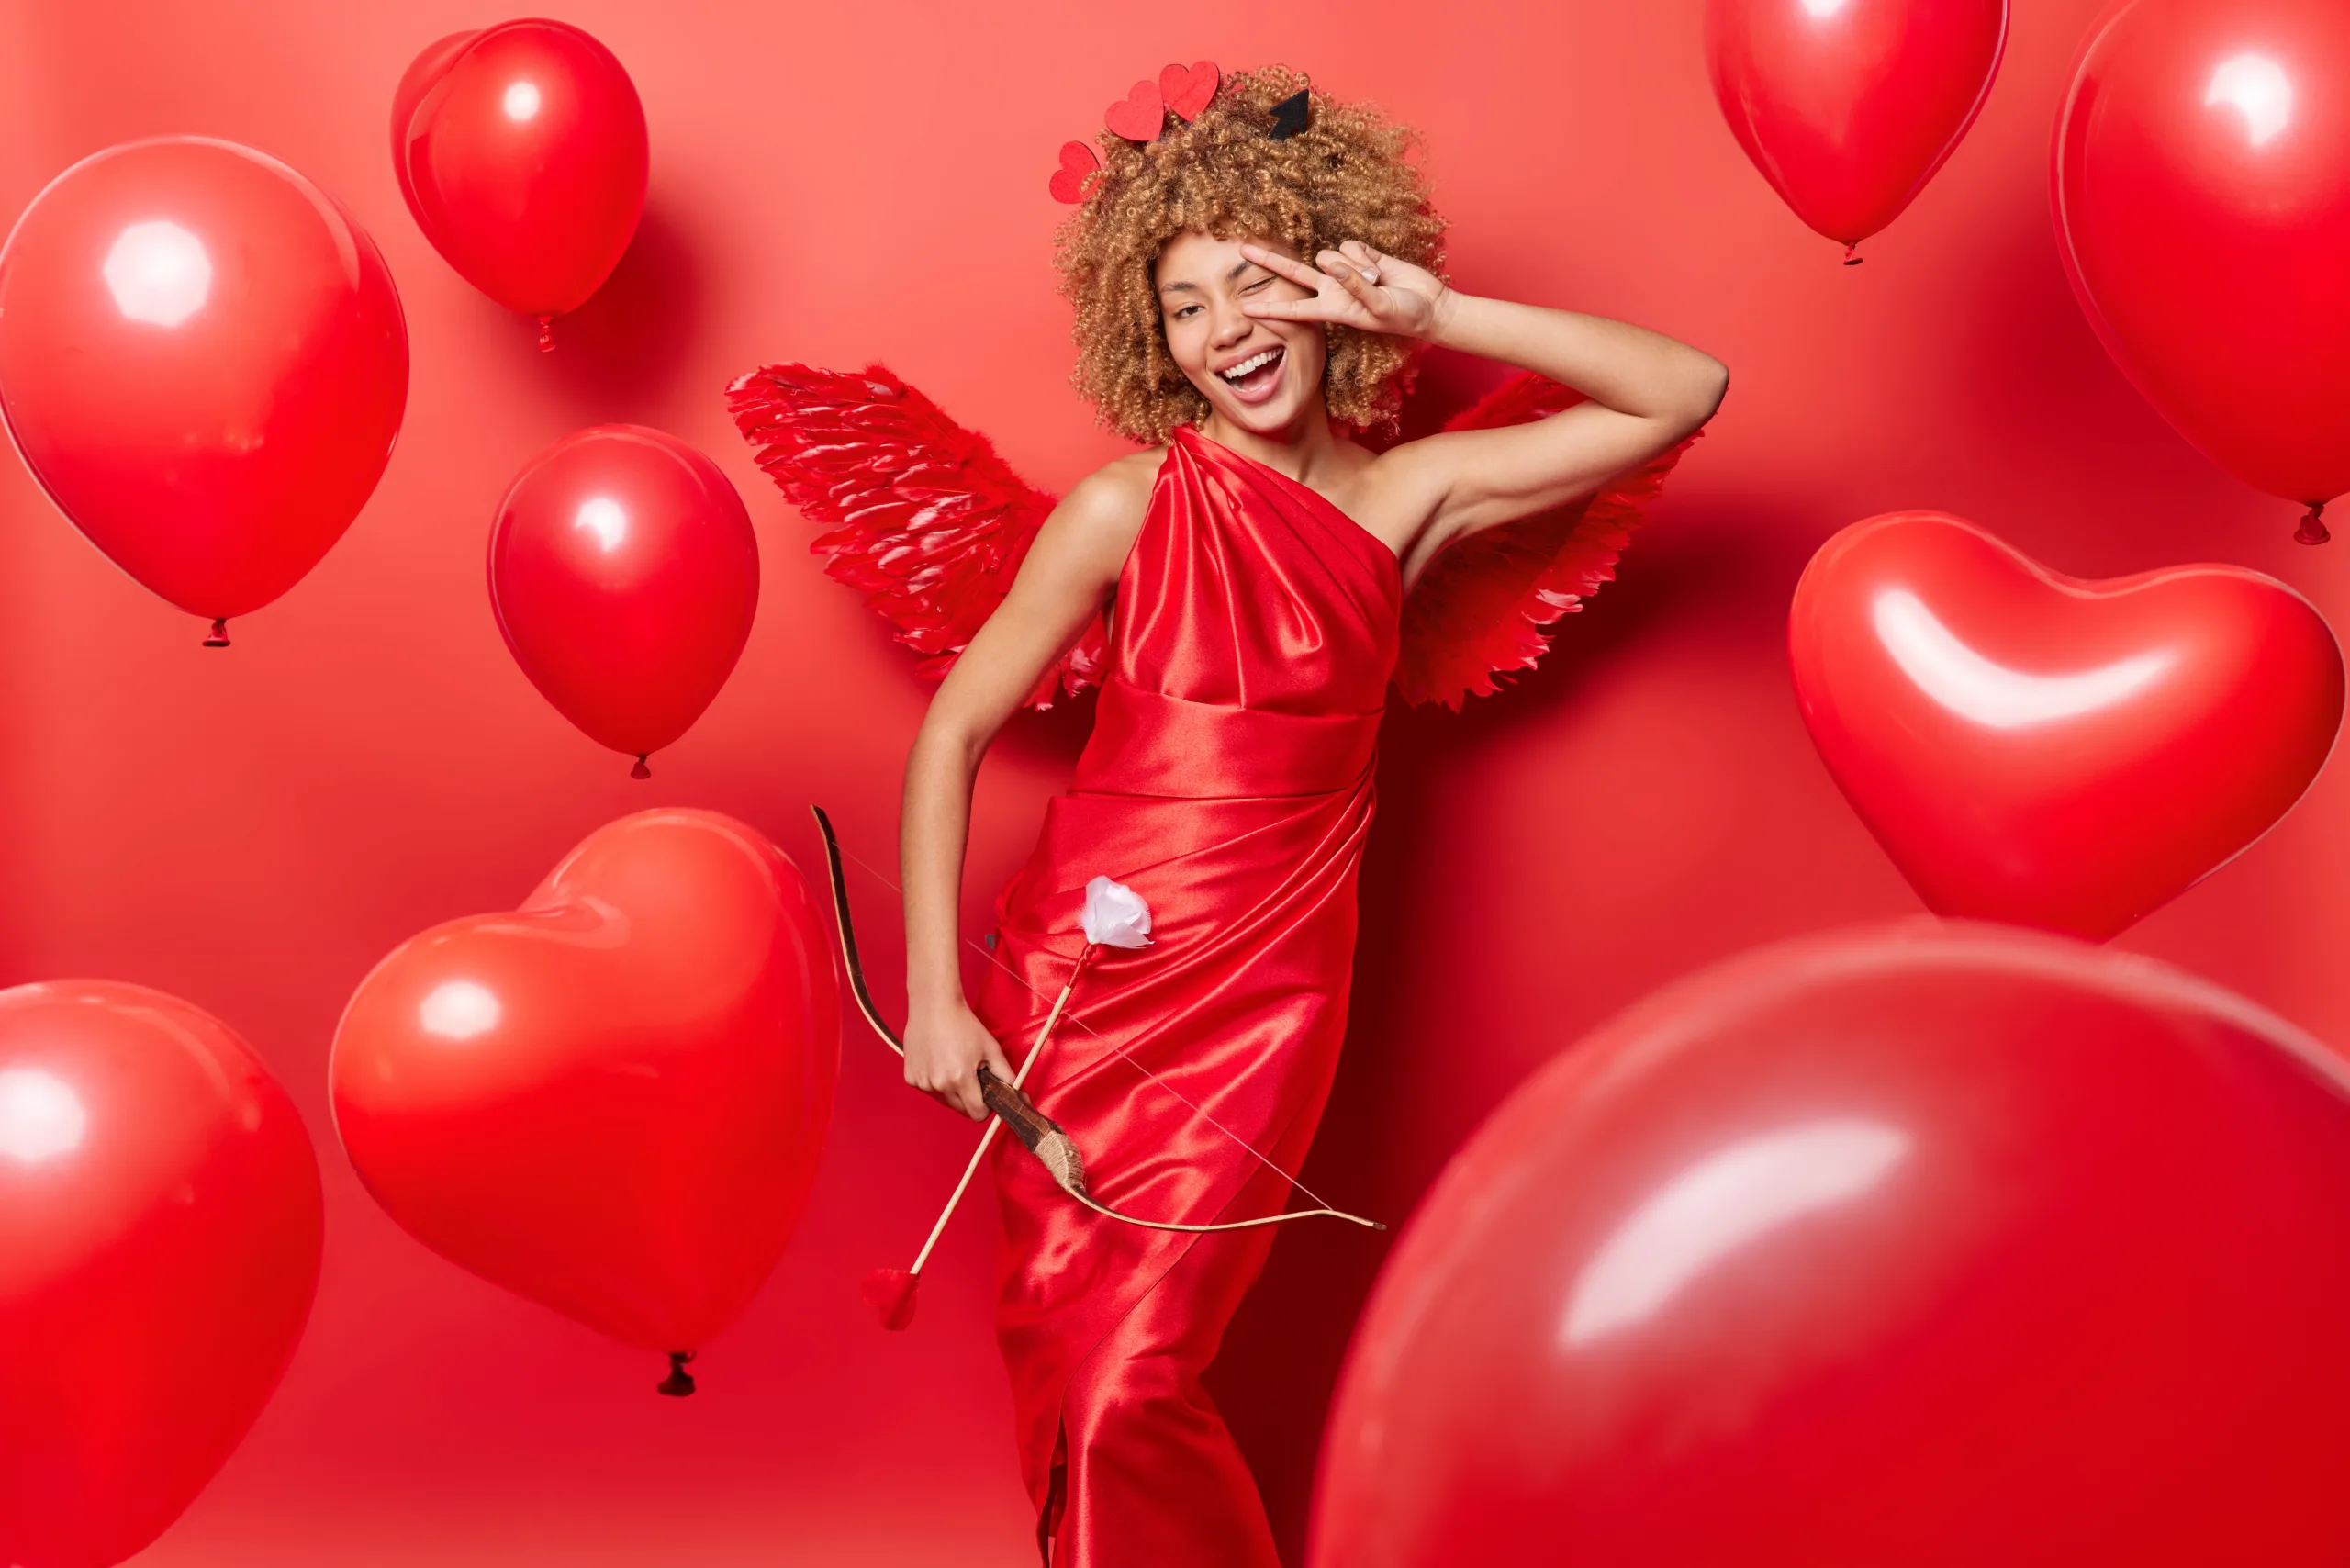 Valentines Day Sales Tips for small business owners